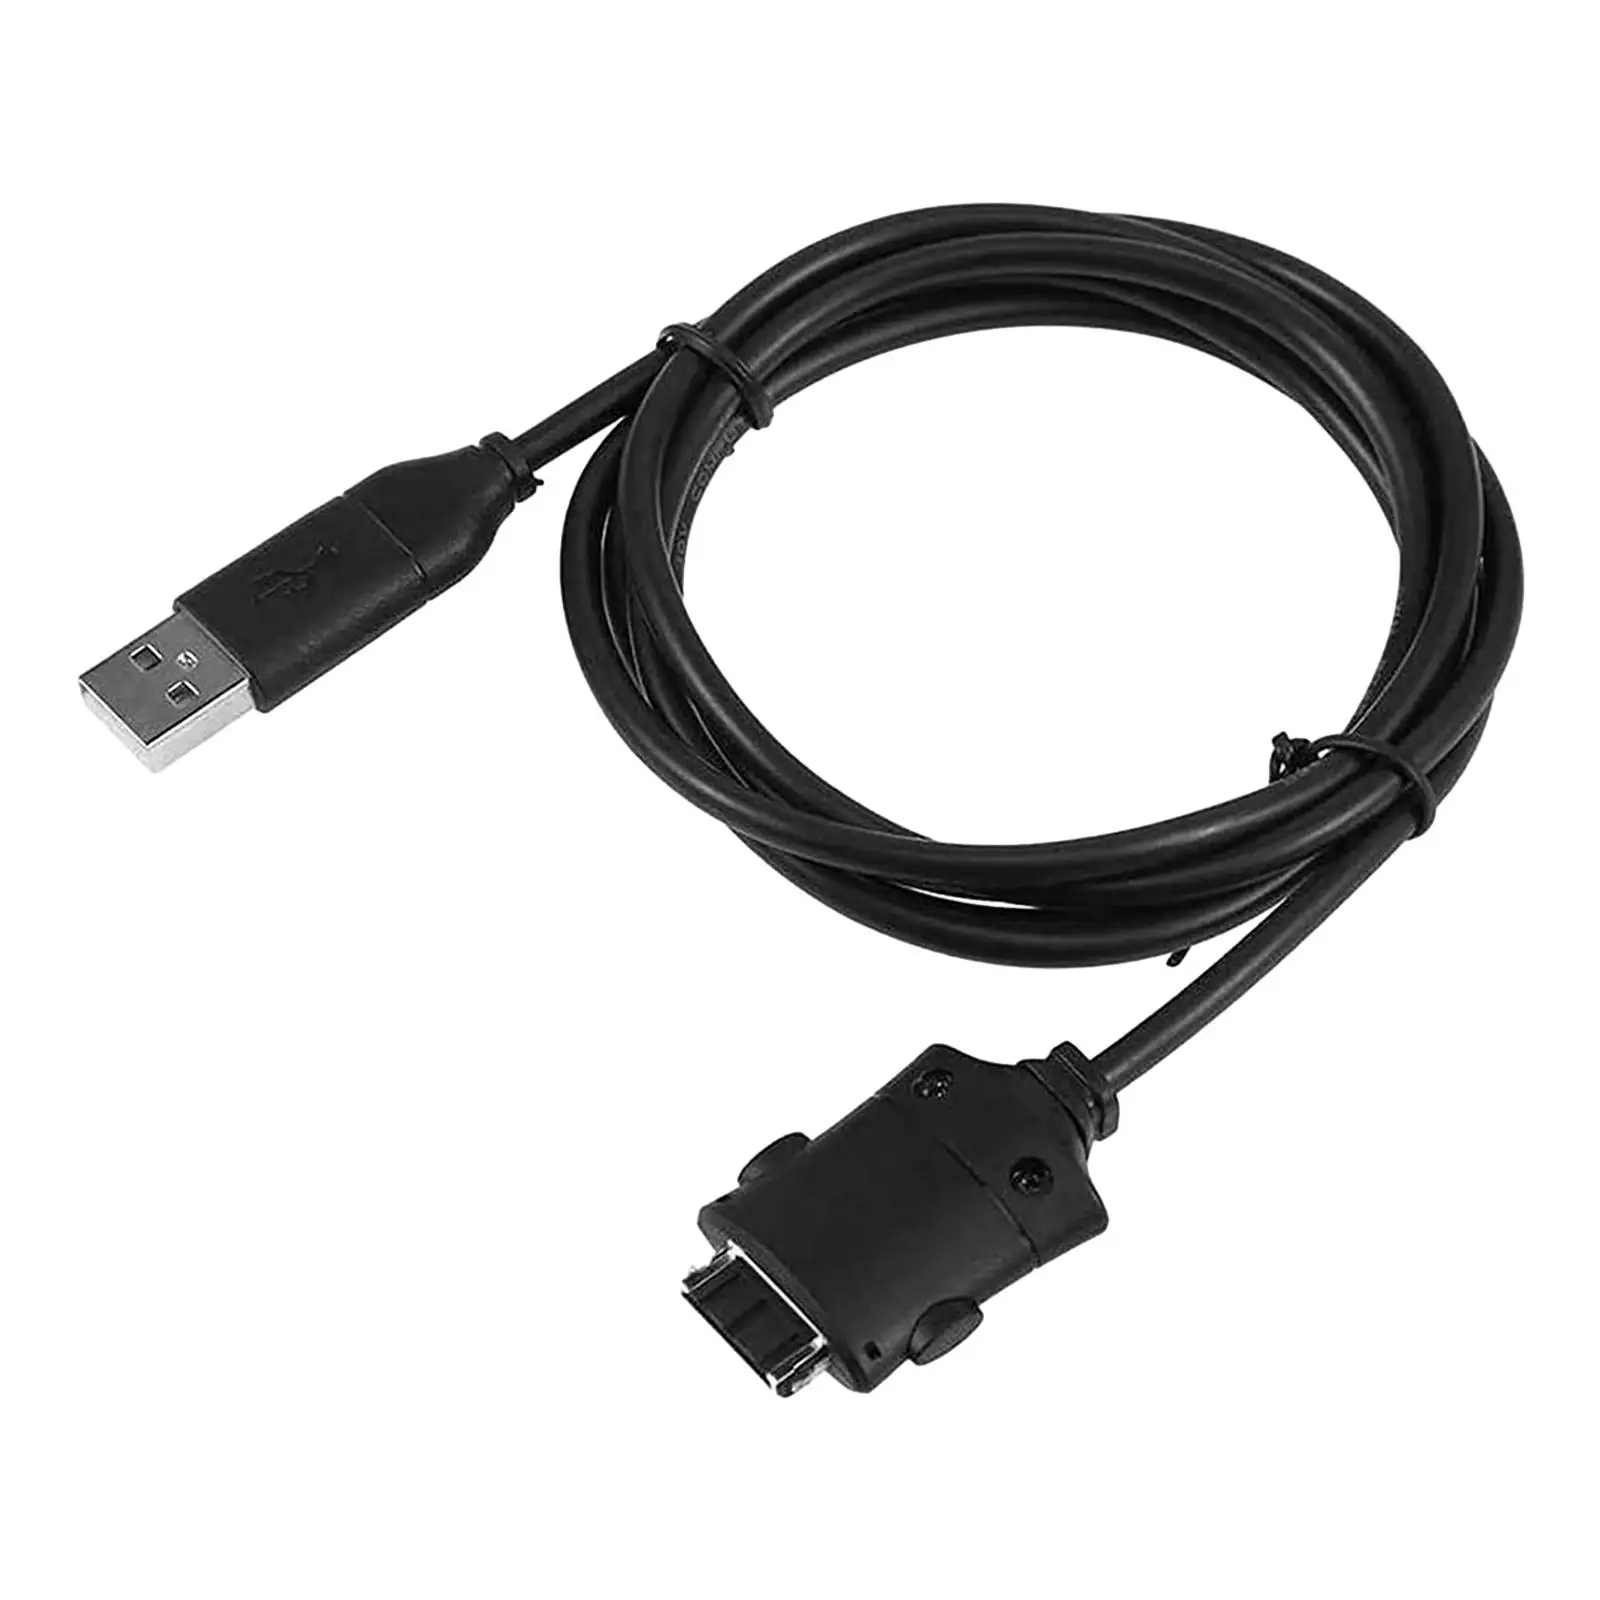 Suc-c2 USB Data Charging Cable Cord Accessories Easy to Use Replacement Transfer Cord 1.5M for Digital Camera Nv8 L730 L830 L83T